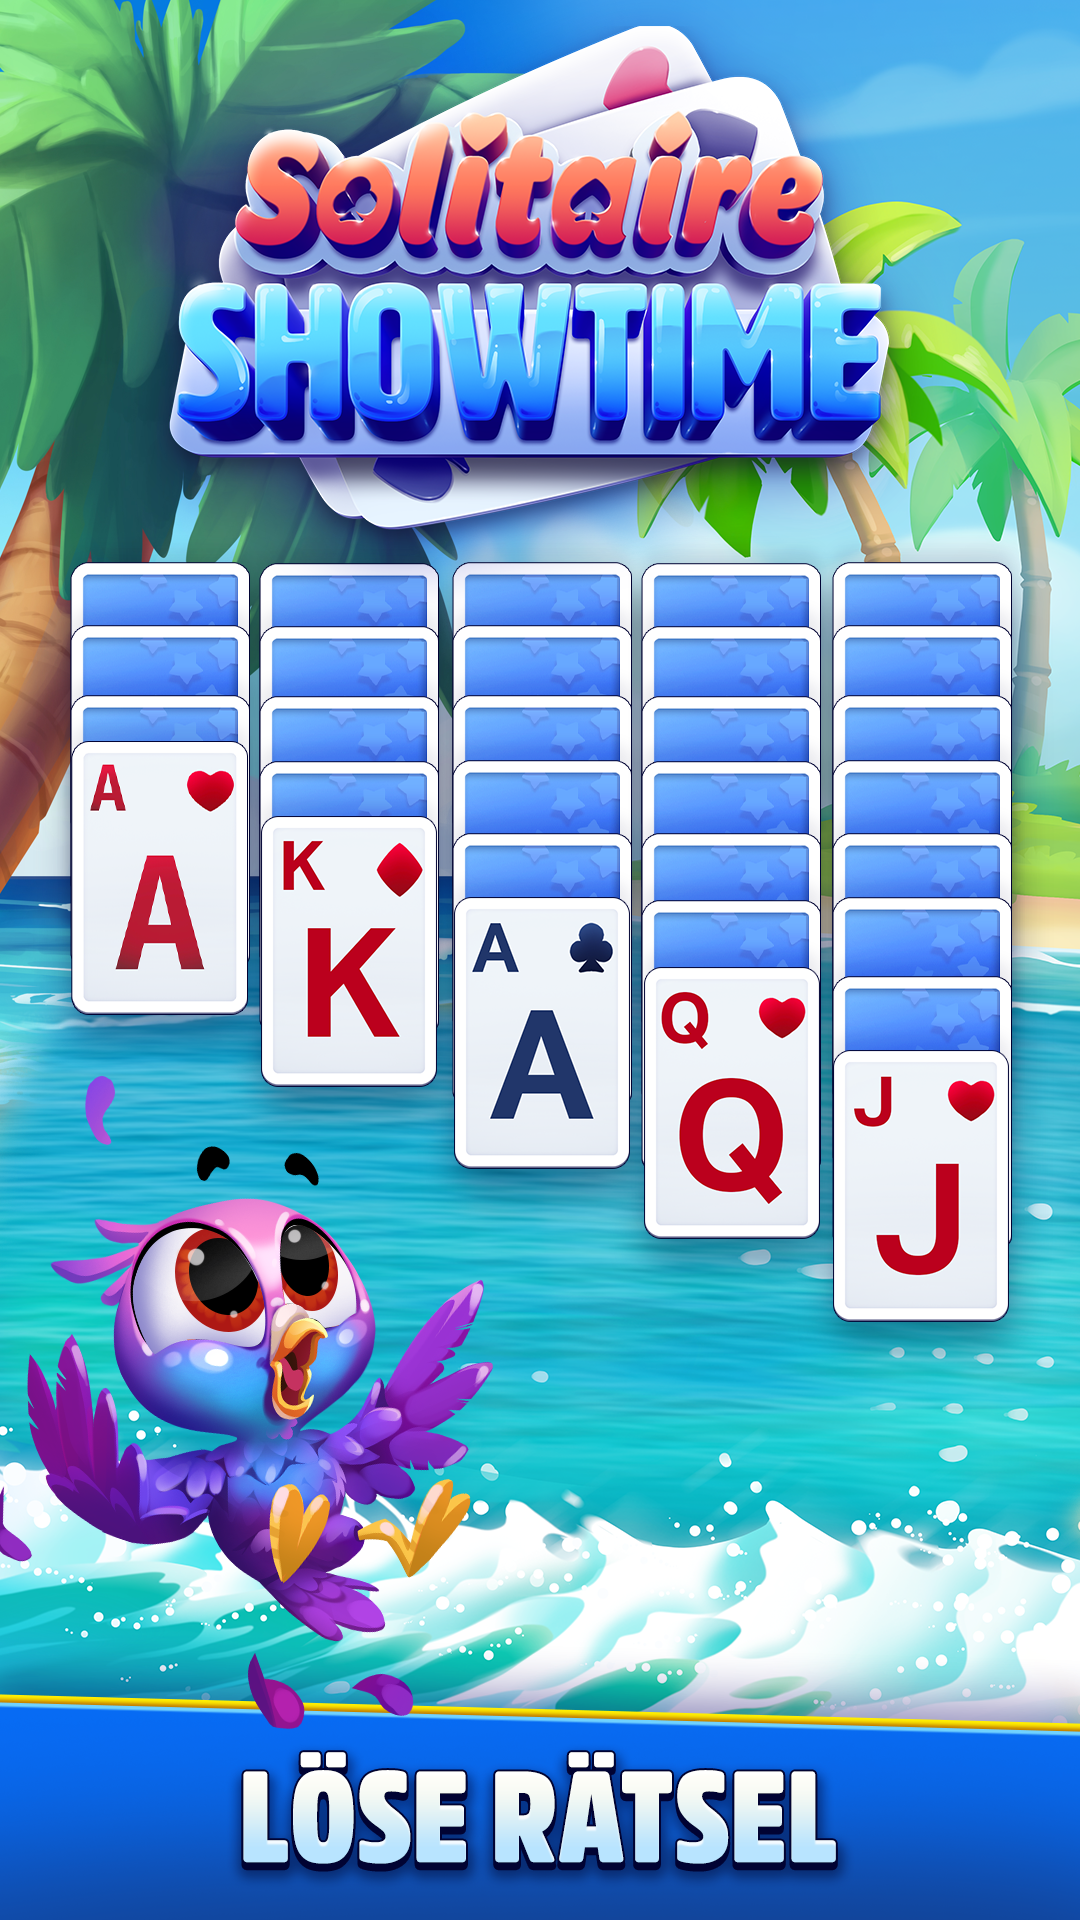 Screenshot 1 of Solitaire Showtime 26.2.0